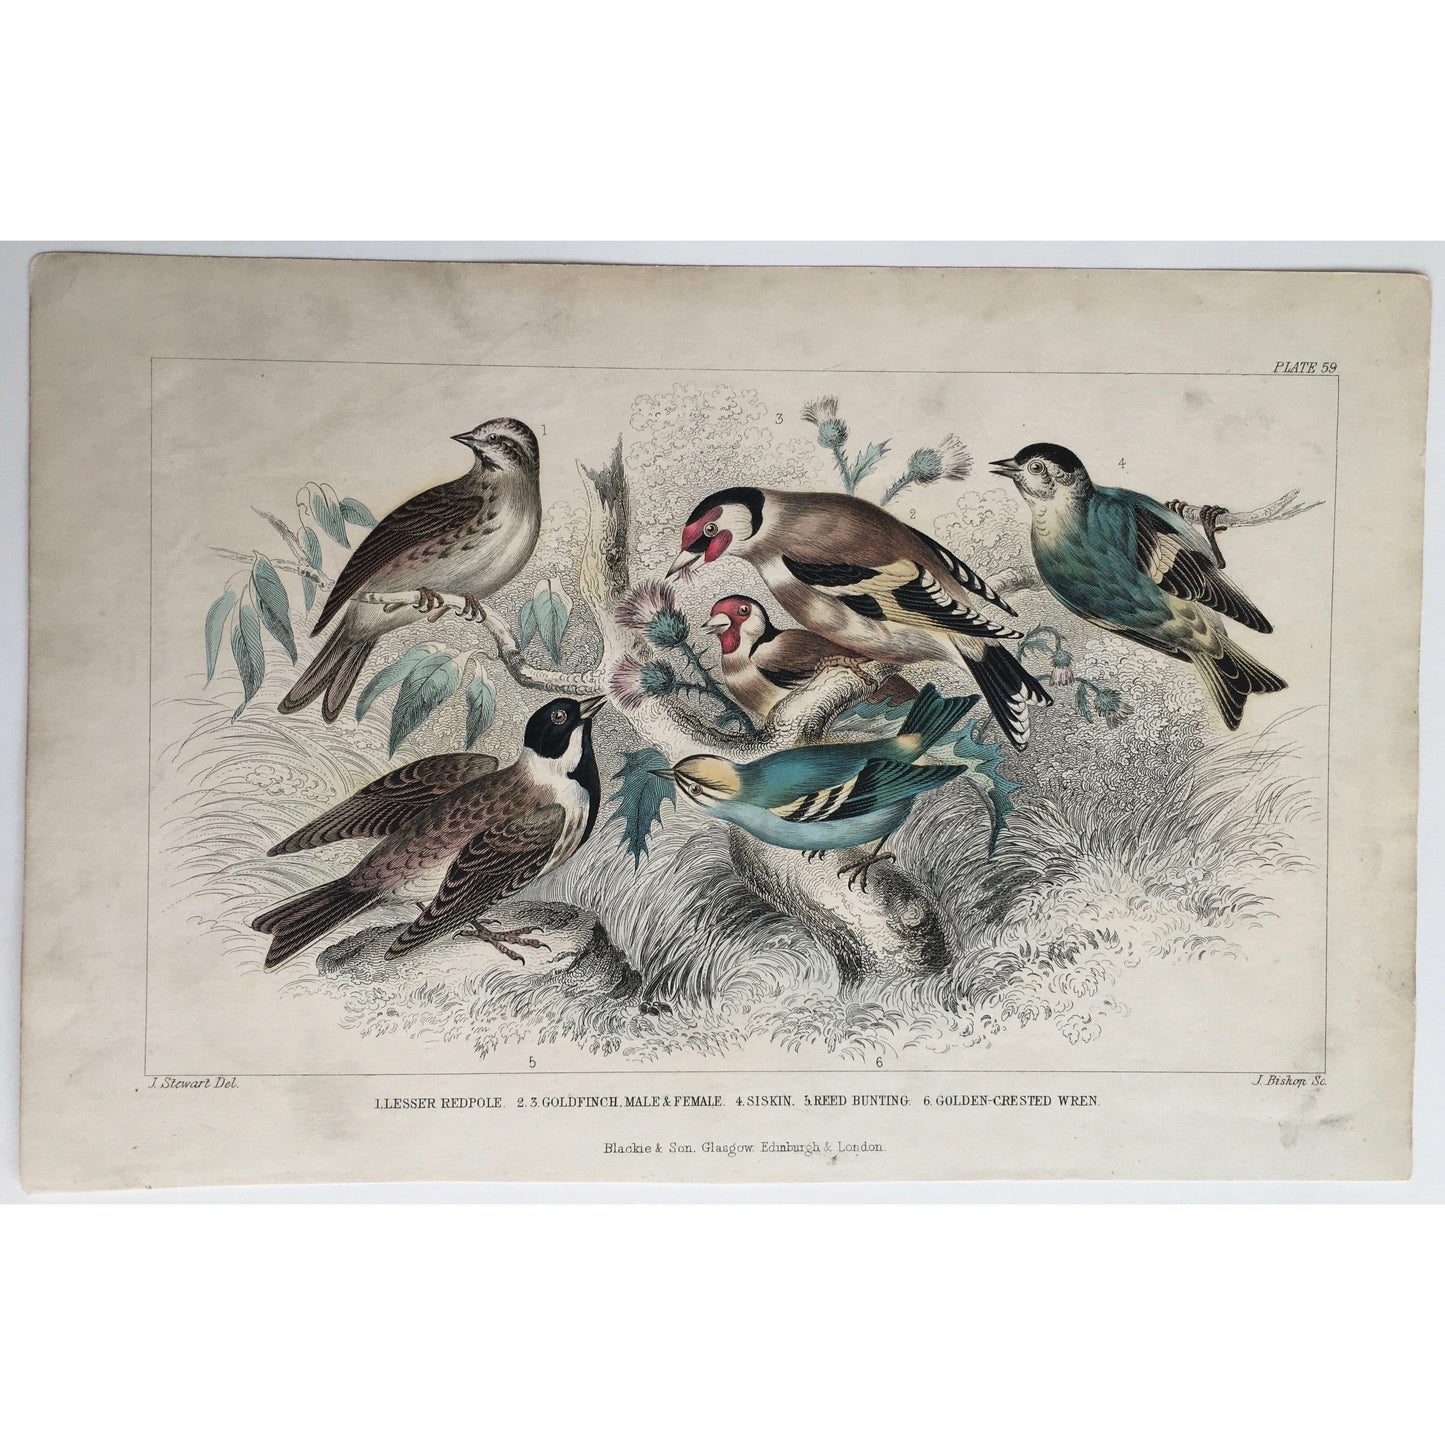 Lesser Repole, Redpole, Goldfinch, Female Goldfinch, Male Goldfinch, Siskin, Reed Bunting, Bunting, Golden-Crested Wren, Wren, Bird, Birds, Ornithology, Oliver Goldsmith, Goldsmith, Natural History, Animals, Wildlife, A History of the Earth and Animated Nature, Nature, Blackie & Son, Blackie and Son, 1852, Coloured Colorful, J. Stewart, J. Bishop, Stewart, Bishop, Antique Prints, Antique, Prints, Old Prints, History, Natural History, Art, Decor, Design, Detail, 